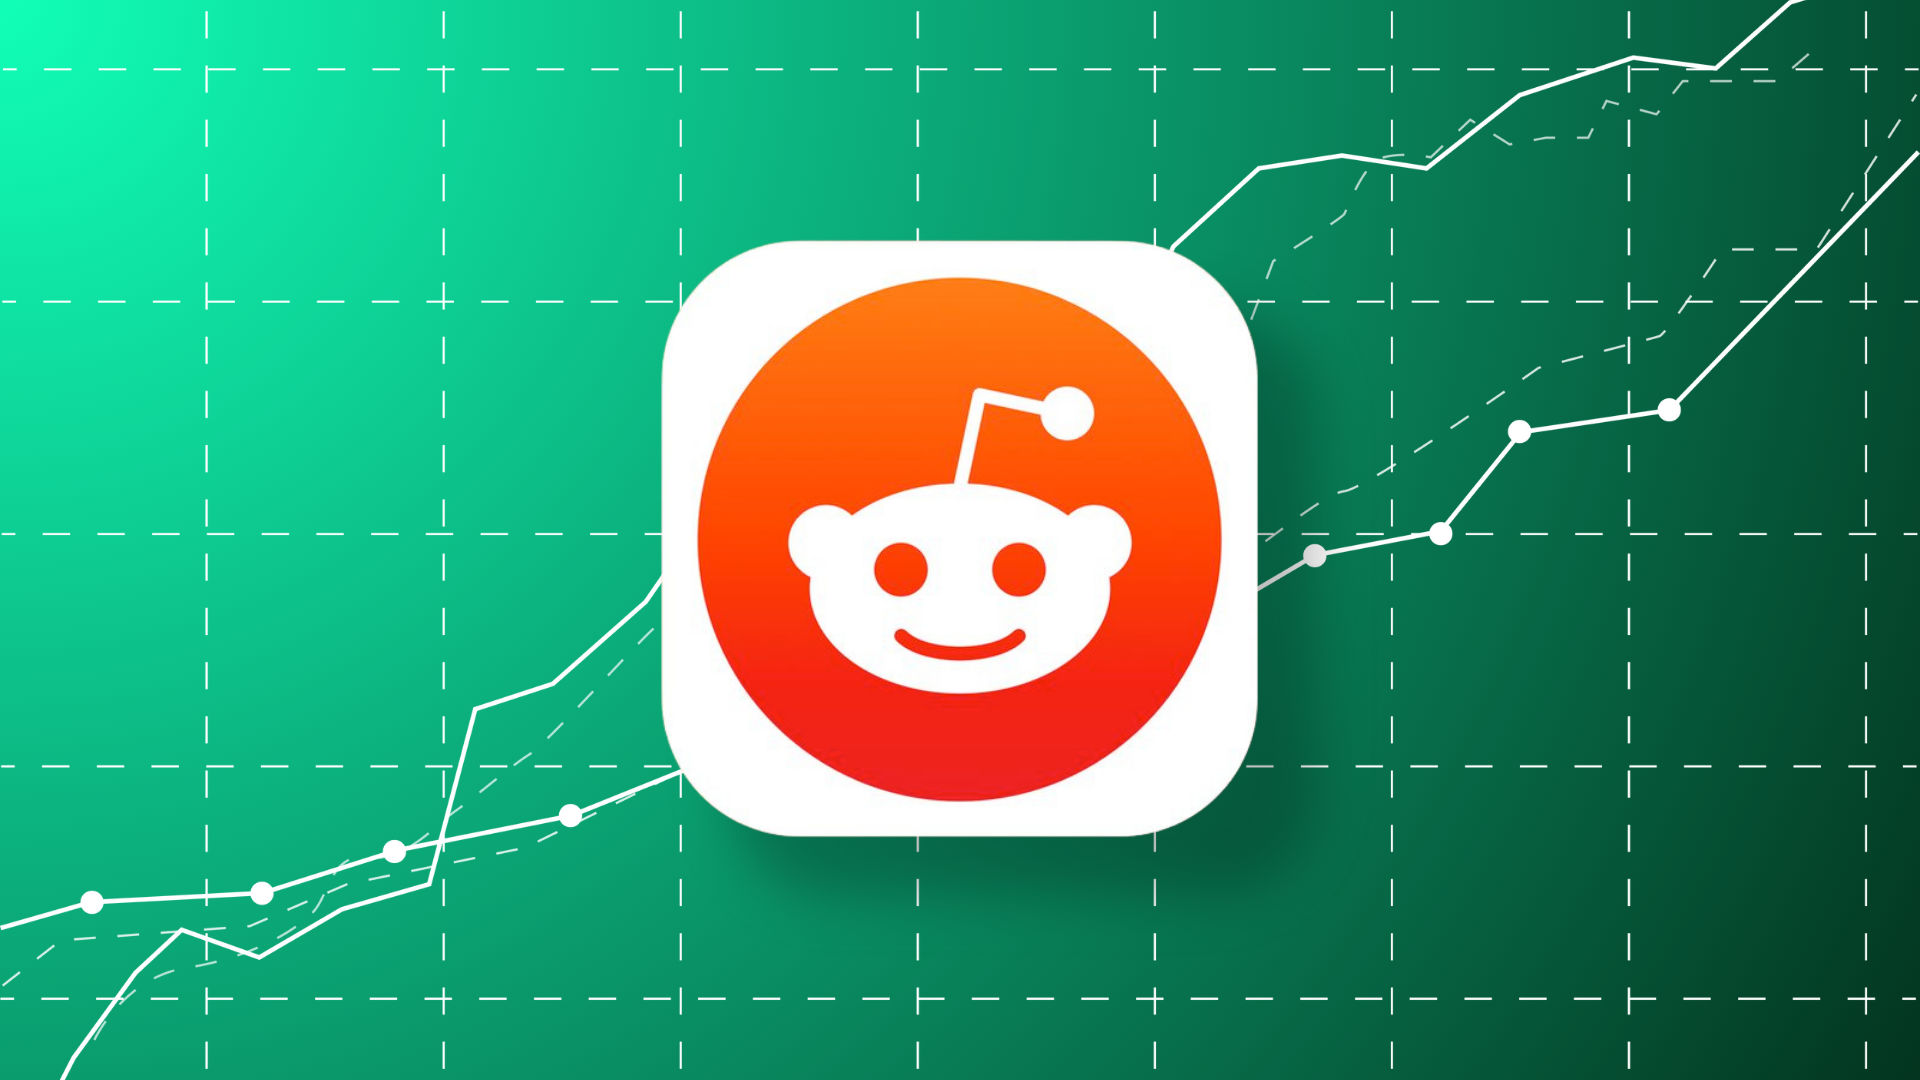 Reddit On The Rise: What We Can Learn From Reddit